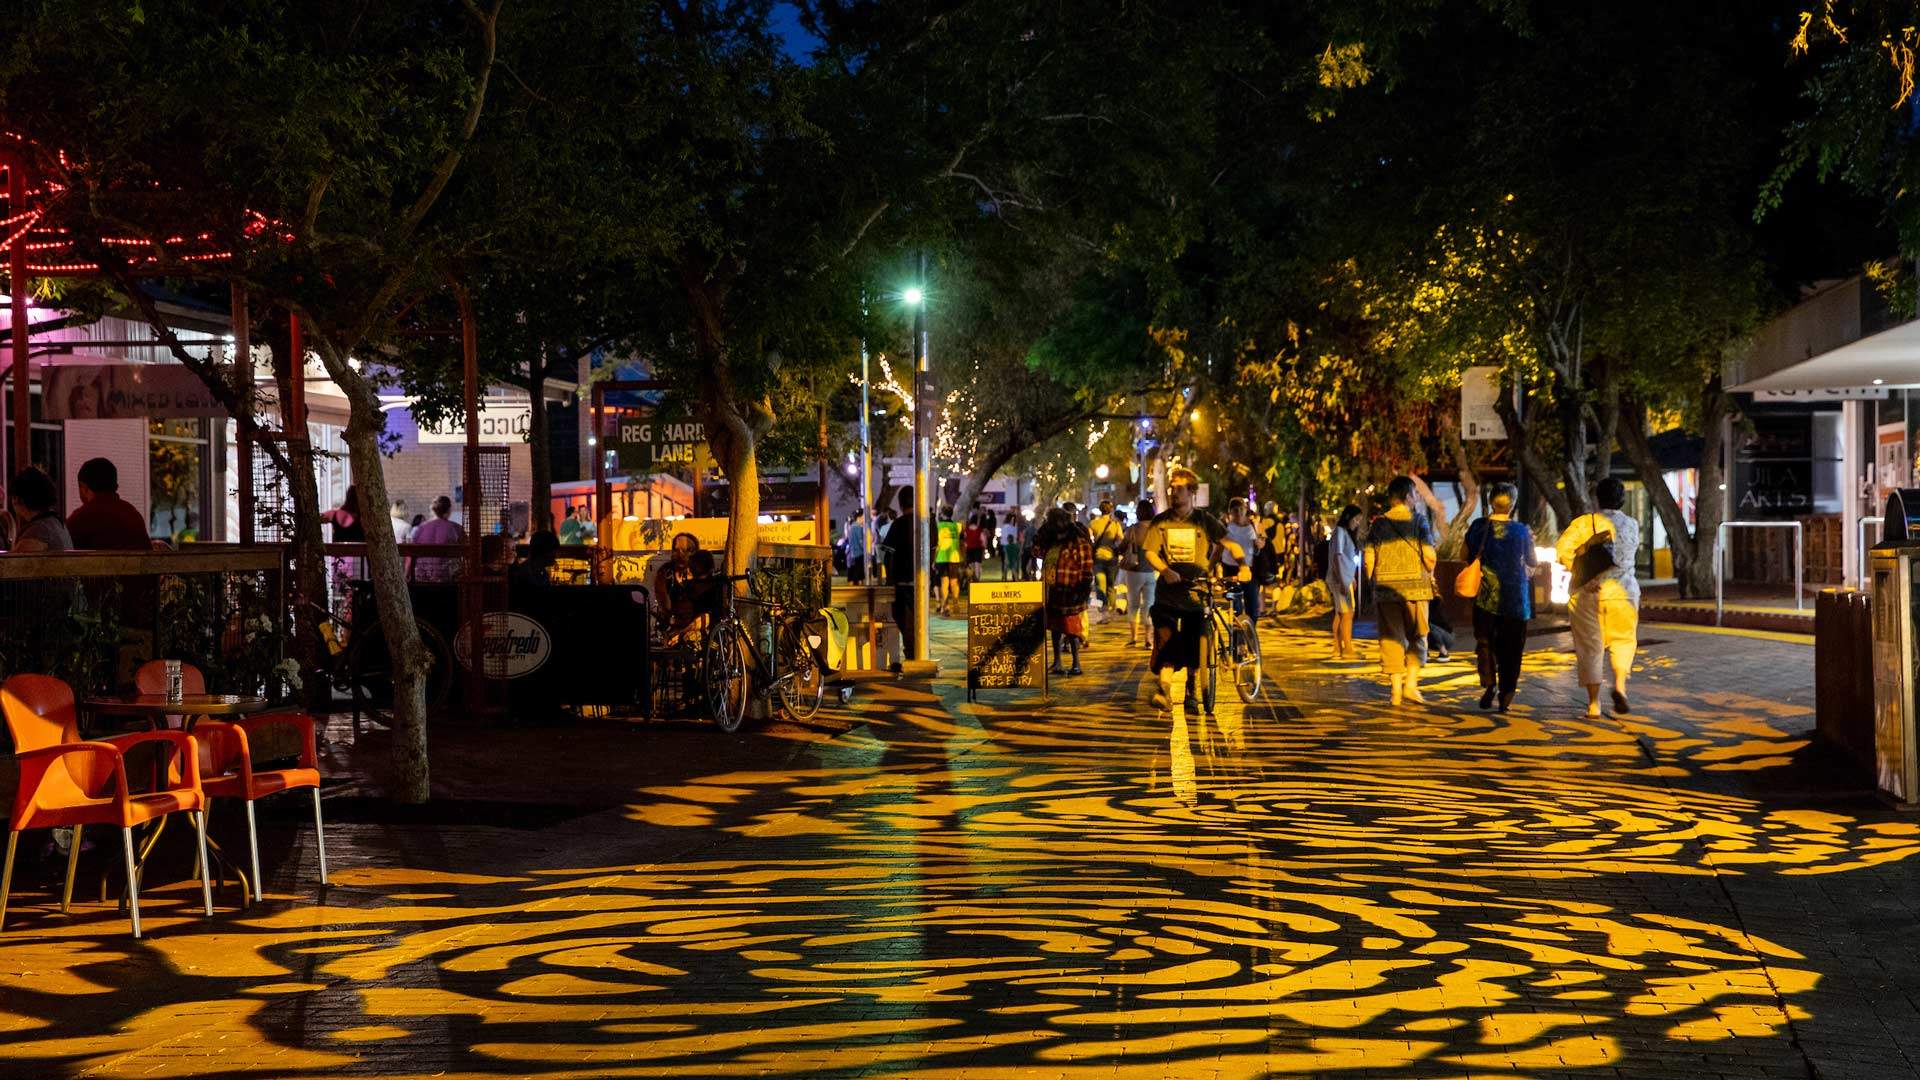 Parrtjima Festival Is Returning to Light Up Alice Springs in 2019 with Six Epic Light Installations